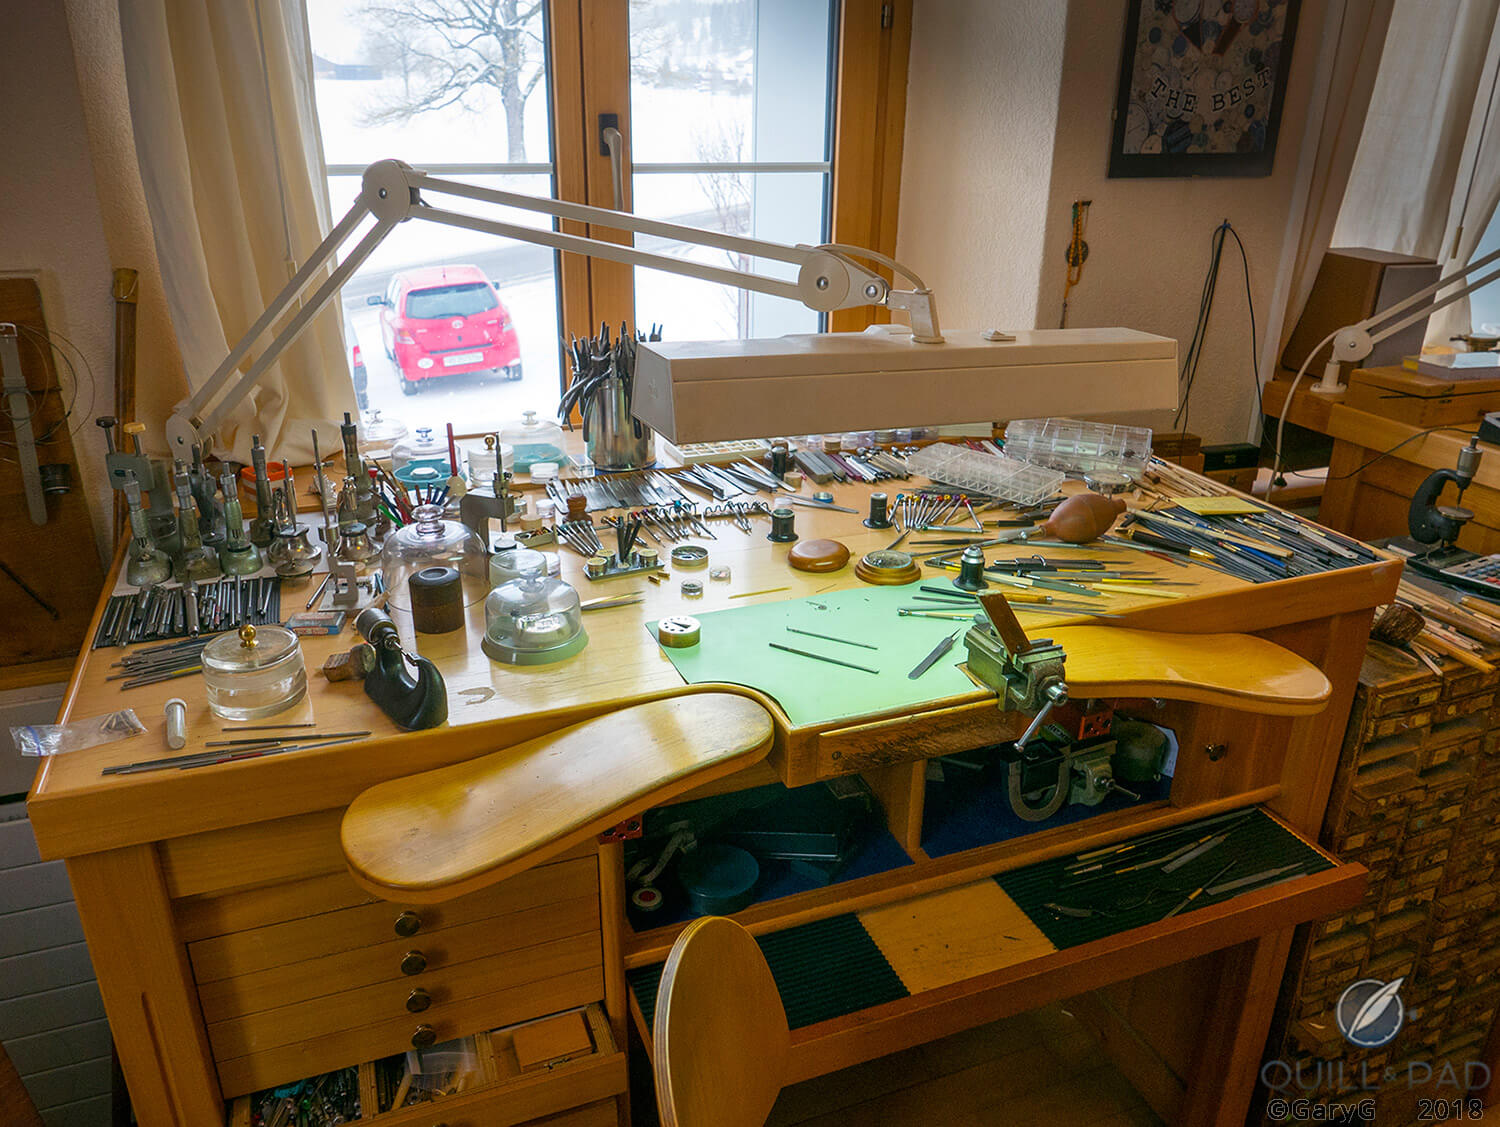 Philippe Dufour’s workbench